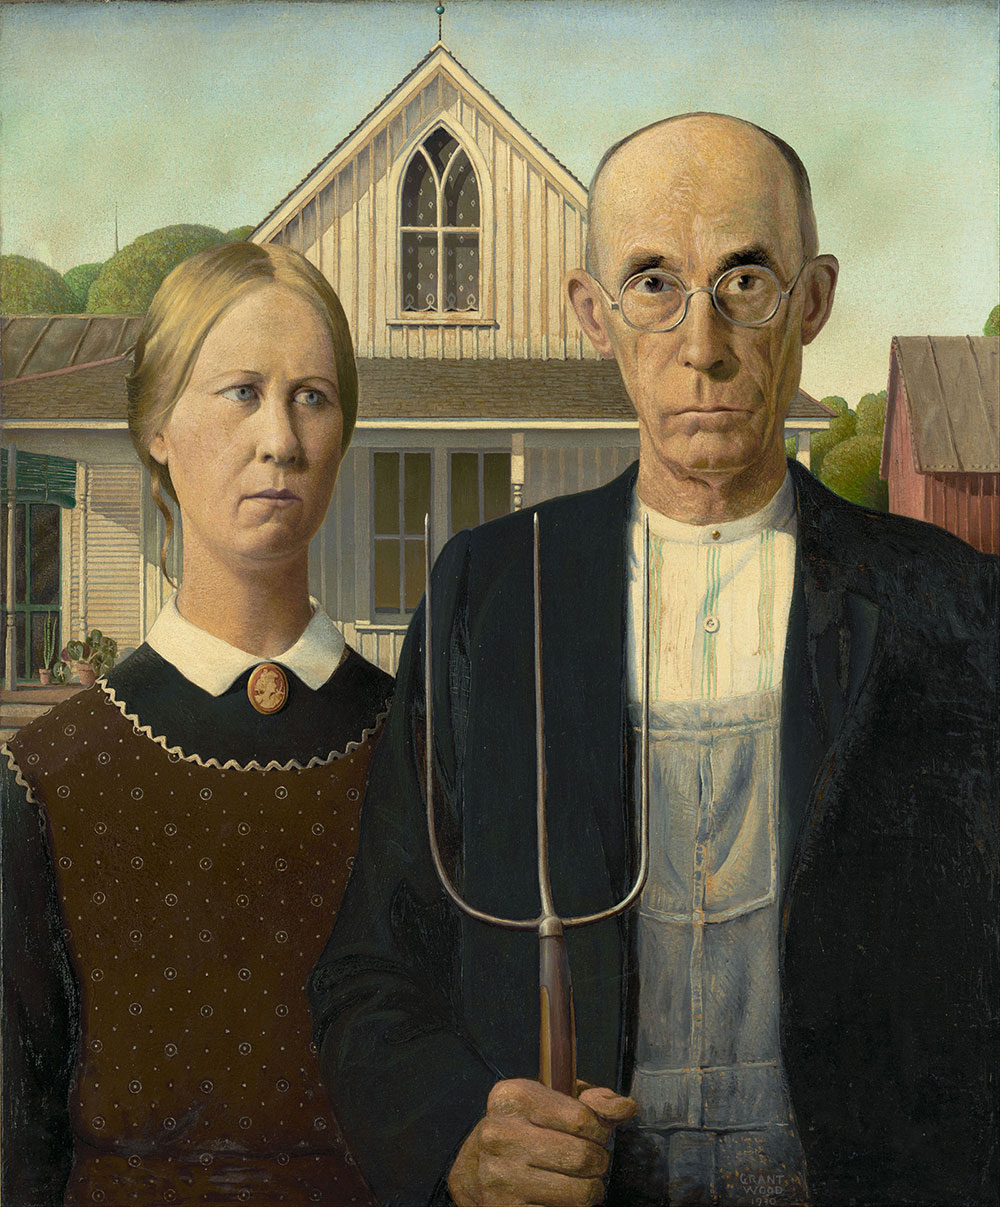 I'm Sure You Can't Match 14 of Paintings to the Artist Quiz American Gothic Painting By Grant Wood